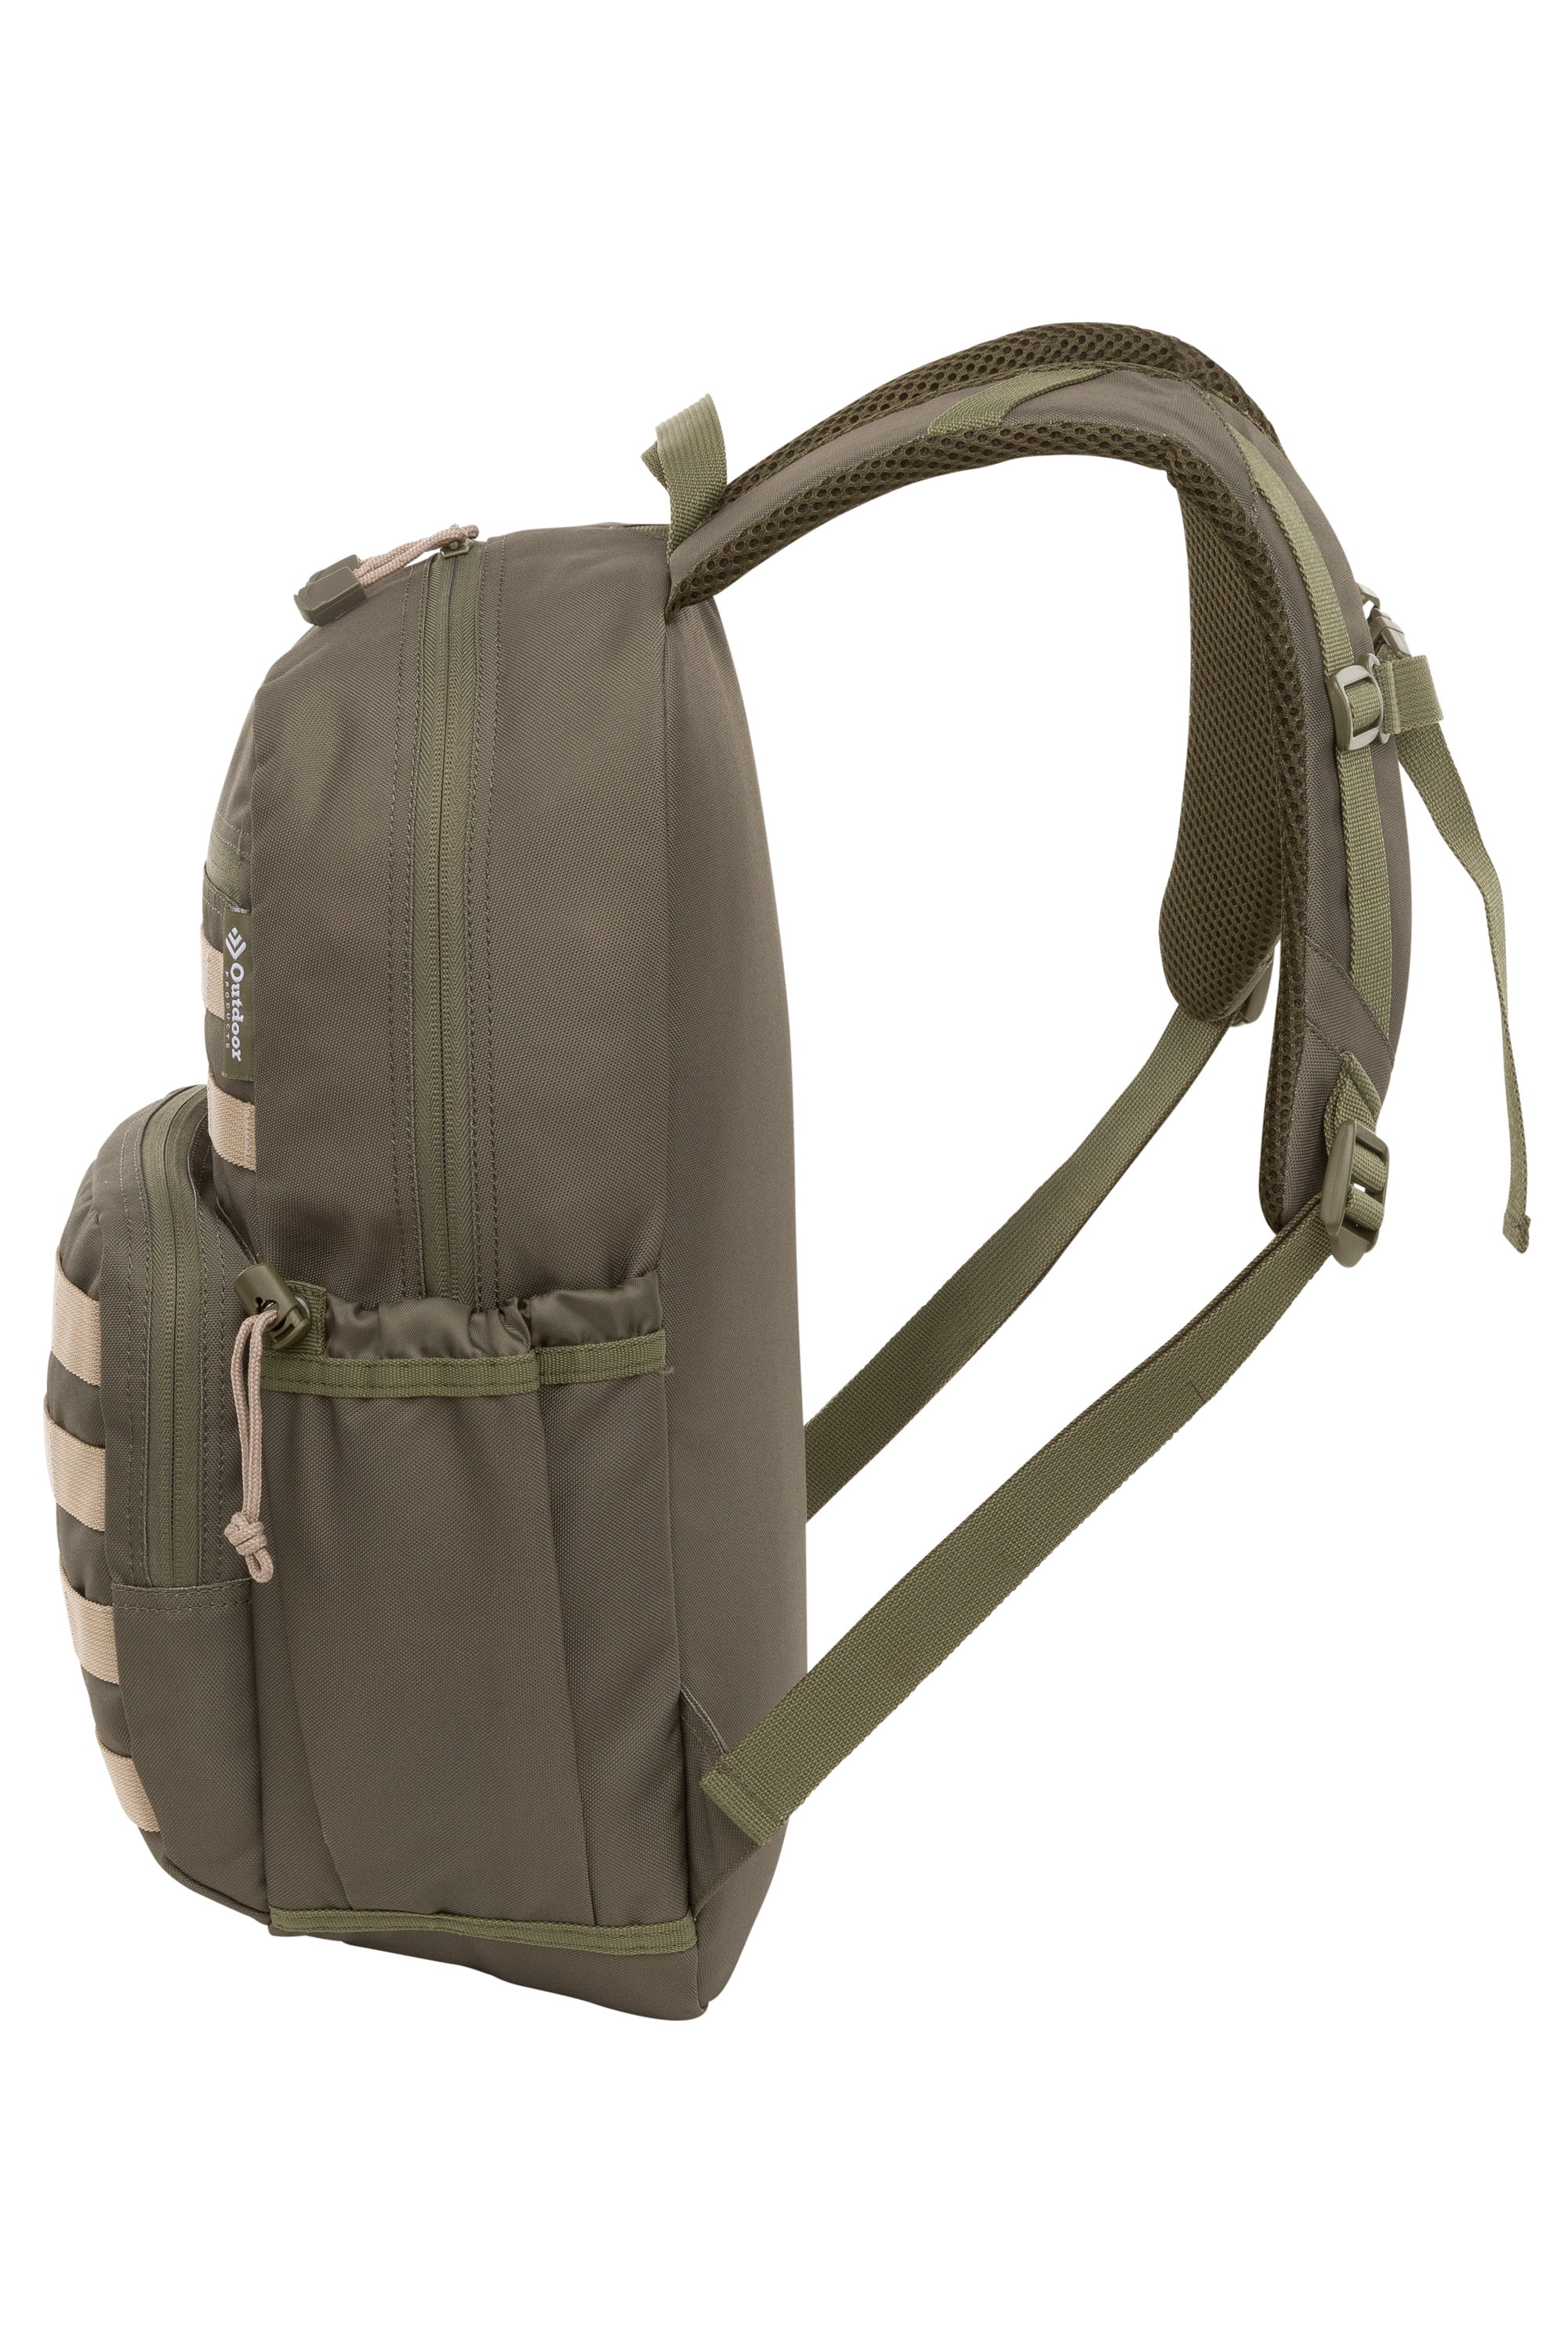 Outdoor Products Venture 17 L Backpack, Green, Brown, Adult, Teen